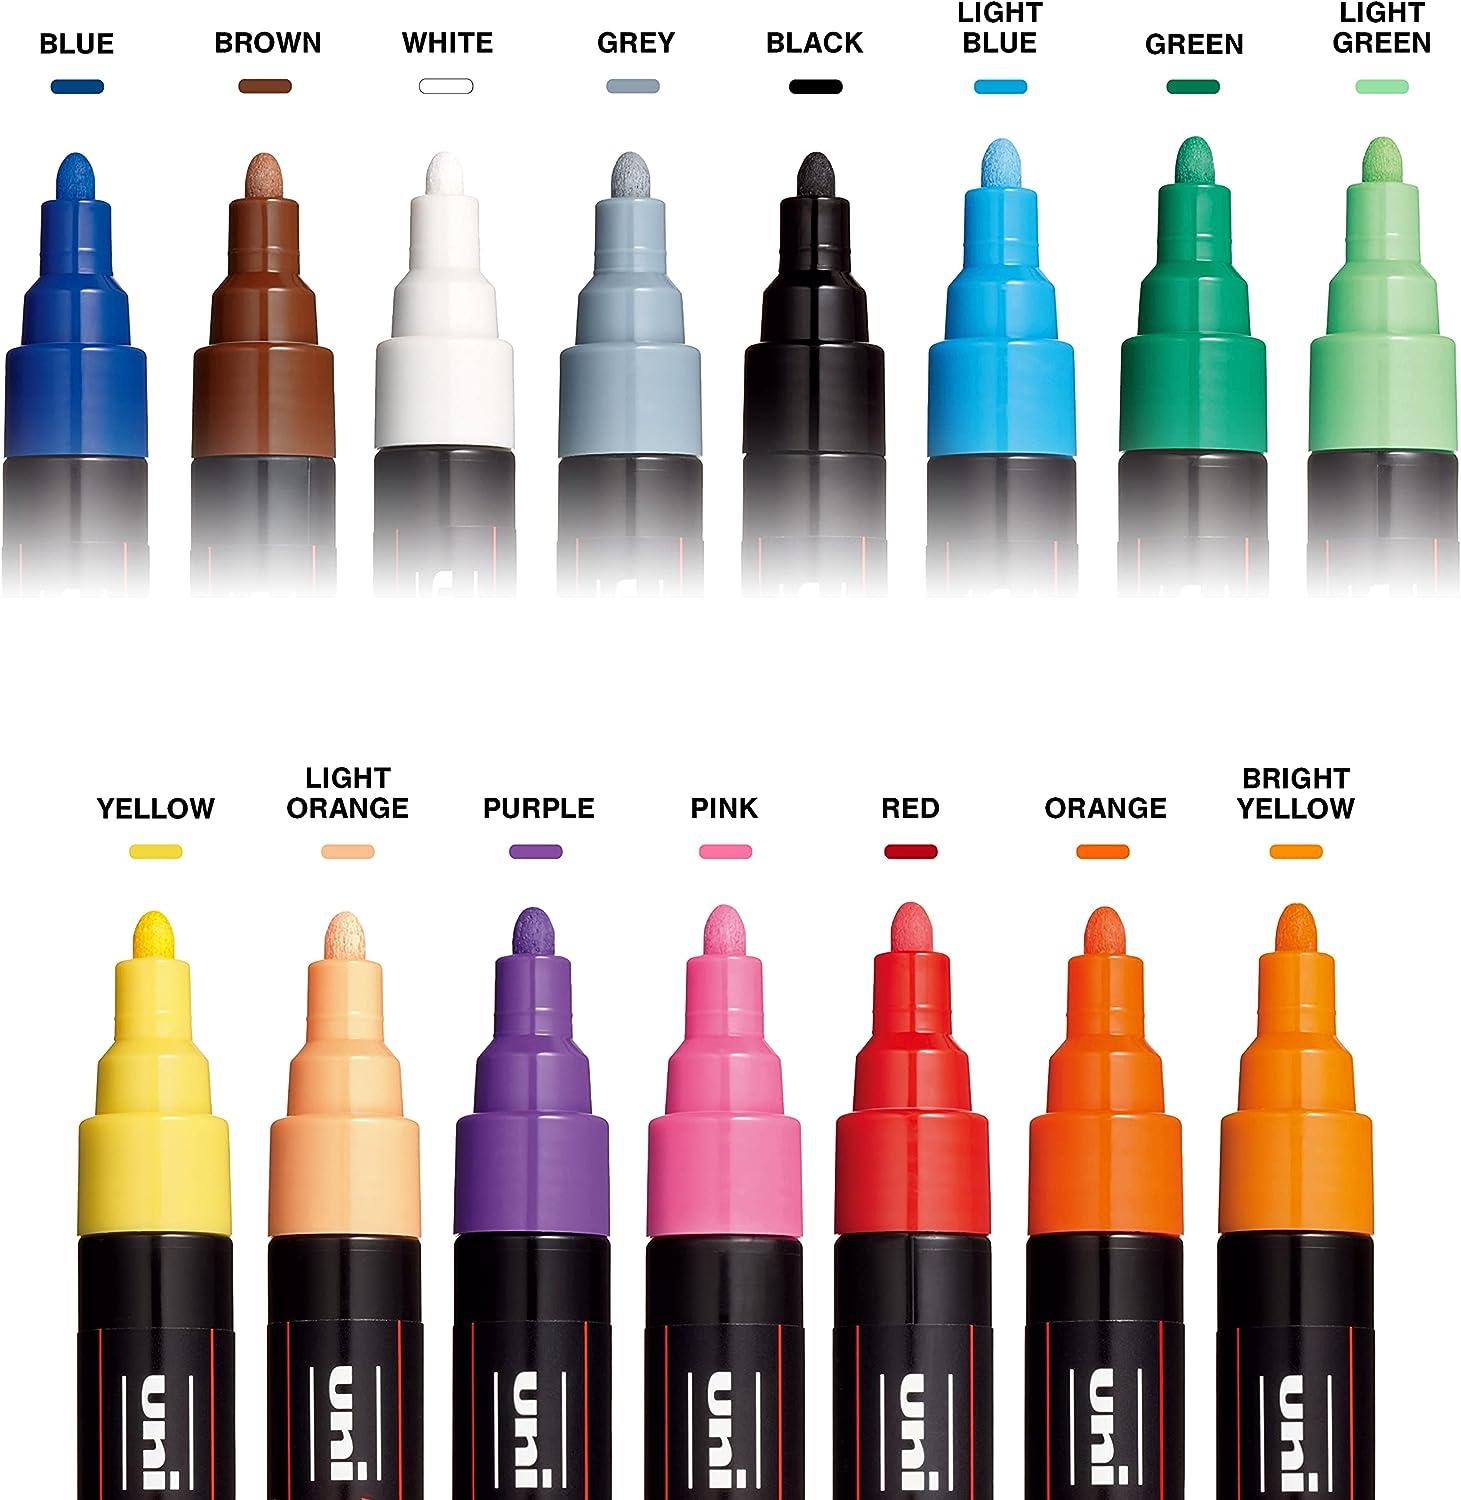  8 Posca Paint Markers, 3M Fine Posca Markers with Reversible  Tips, Posca Marker Set of Acrylic Paint Pens